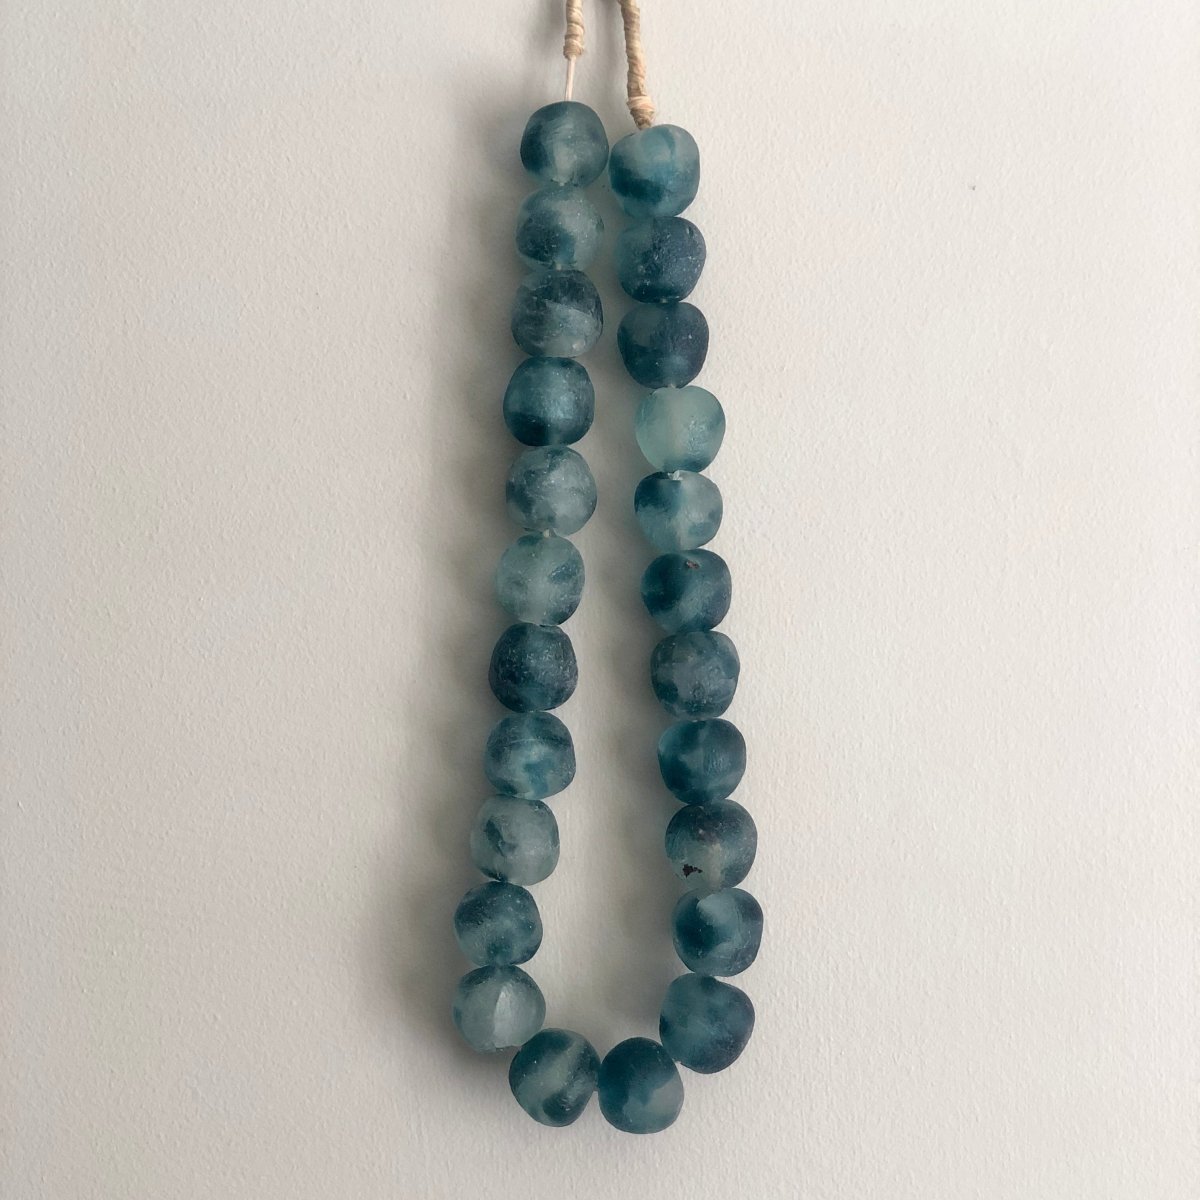 Small glass beads - Centered, Inc.